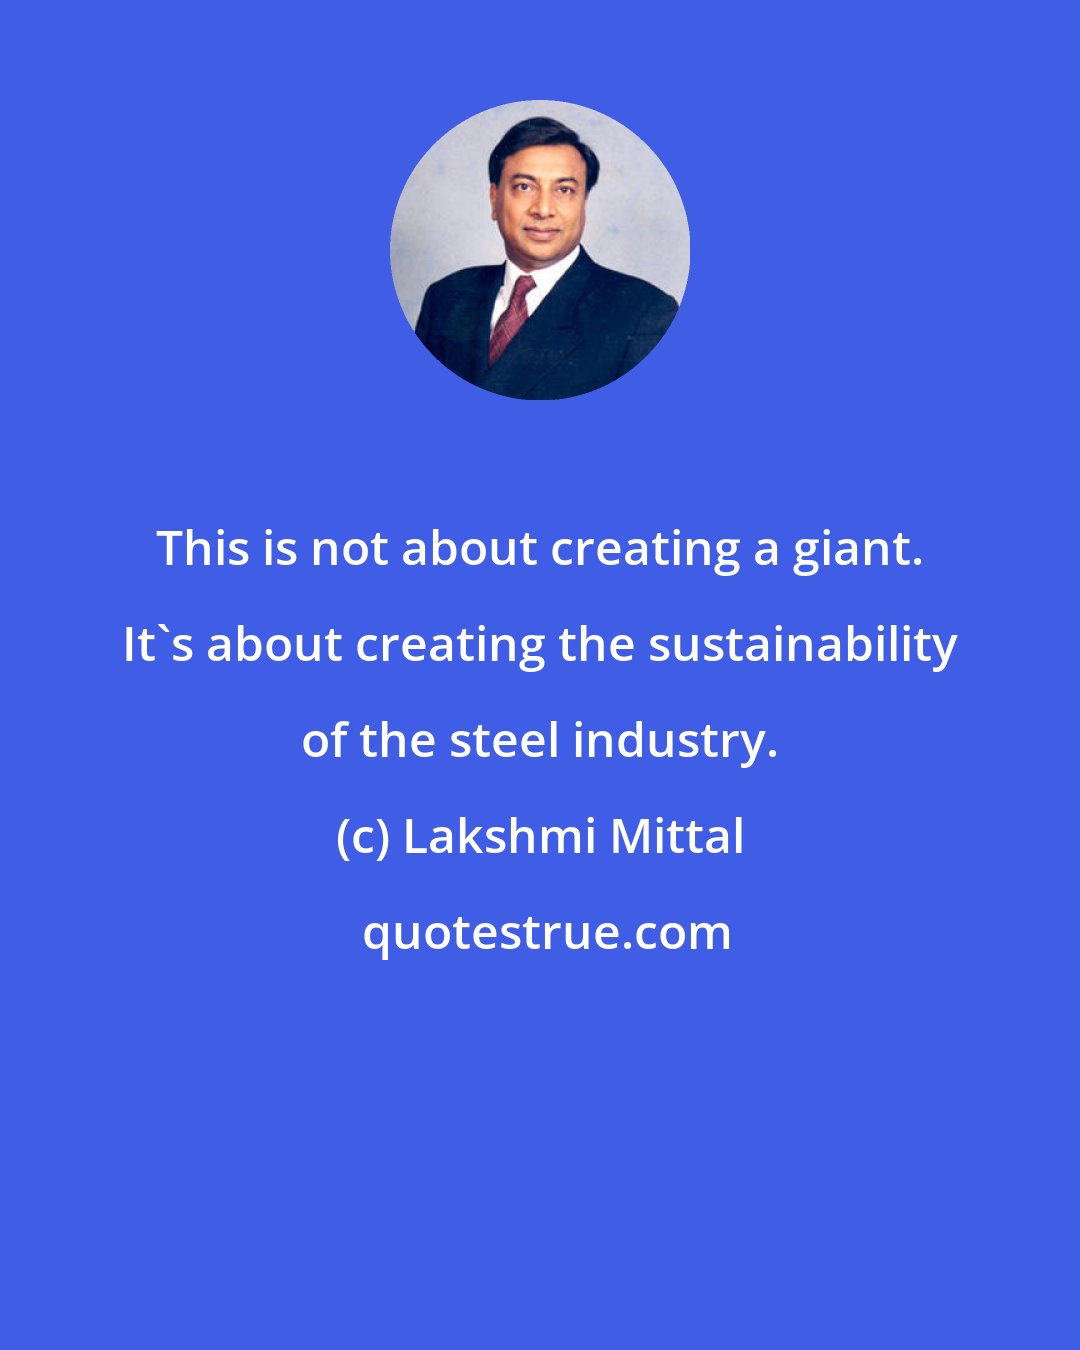 Lakshmi Mittal: This is not about creating a giant. It's about creating the sustainability of the steel industry.